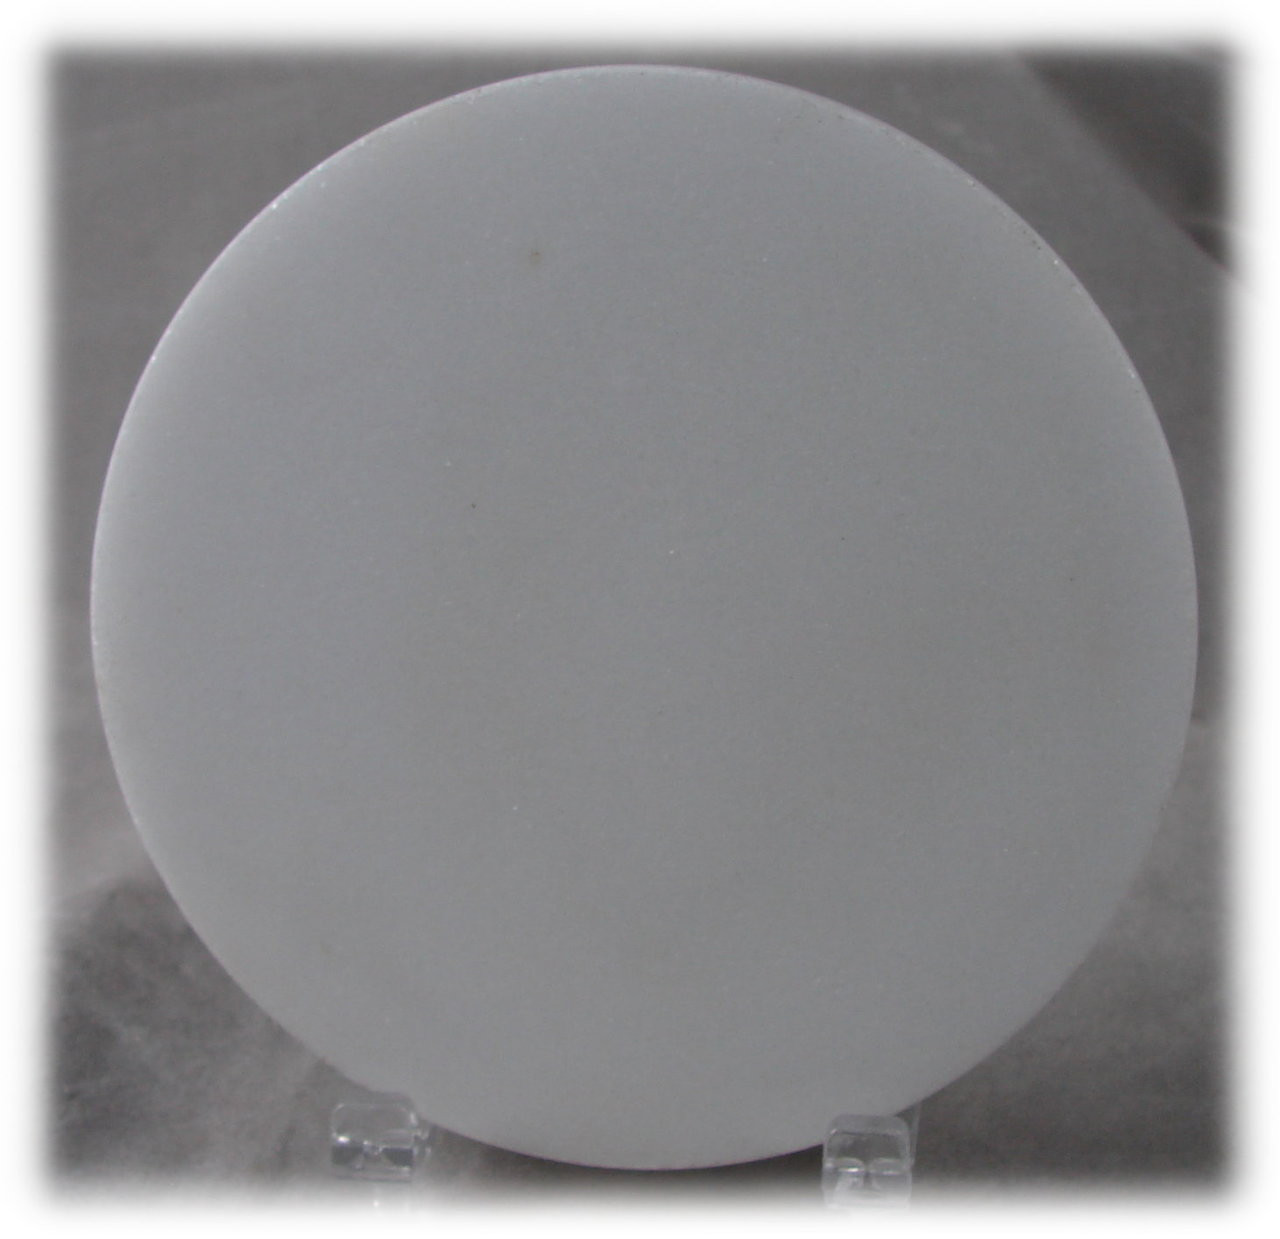 M-WH-4DiaEP: Imperial White Marble, 4 inches in diameter x 7-8mm thick, Polished on all surfaces, (6F) - Case of 10. Stock Reduction, 25% price reducted,